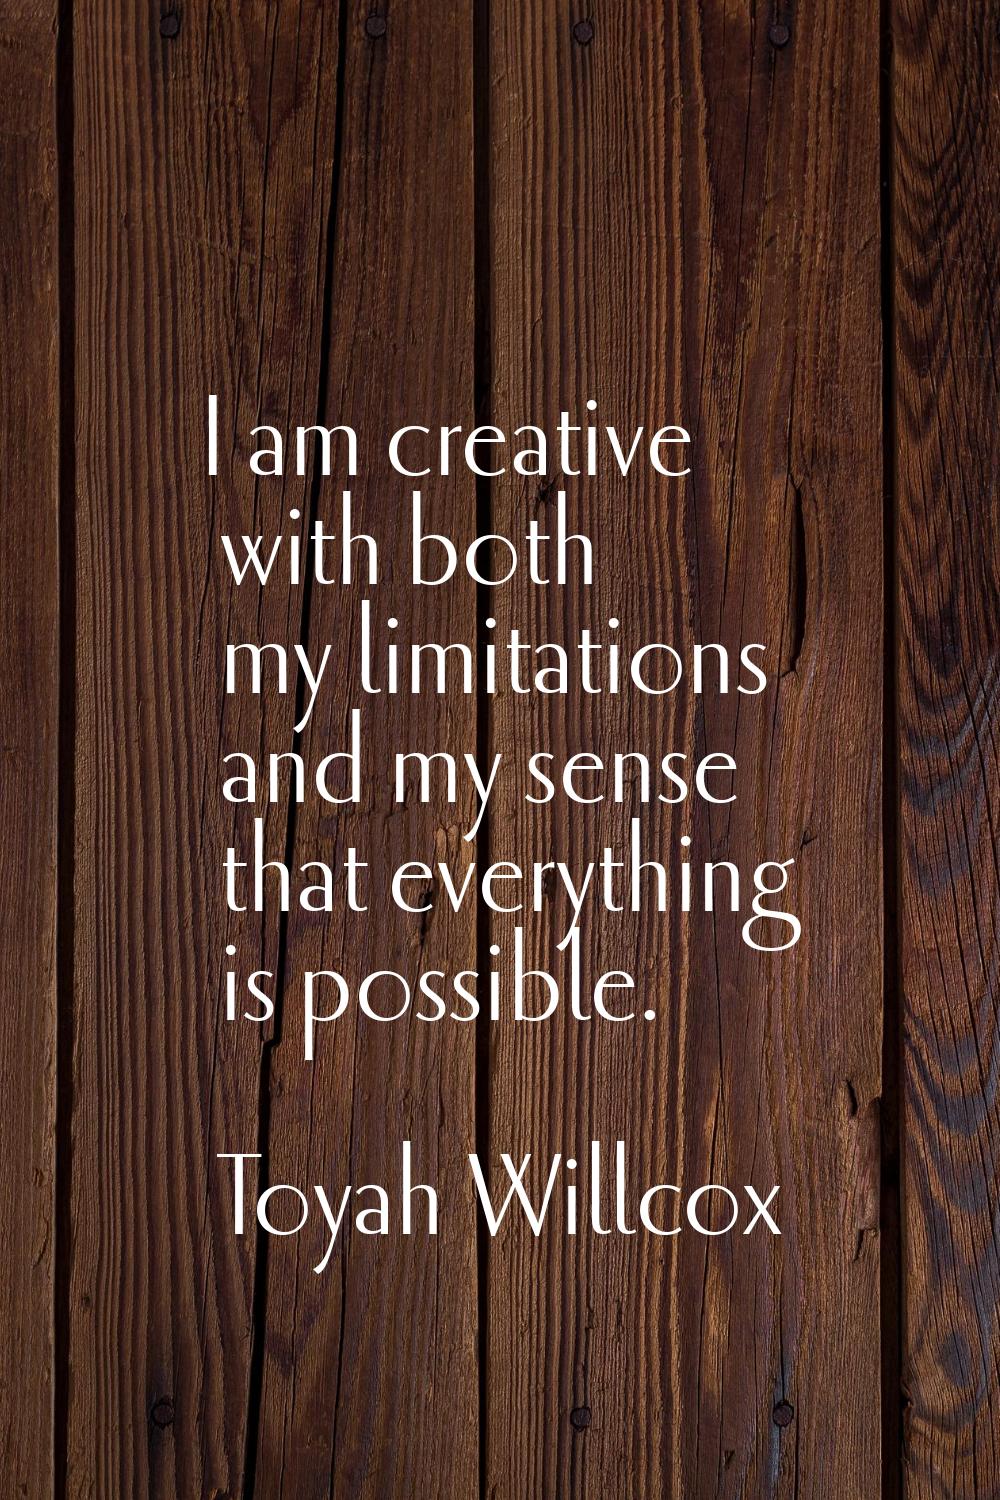 I am creative with both my limitations and my sense that everything is possible.